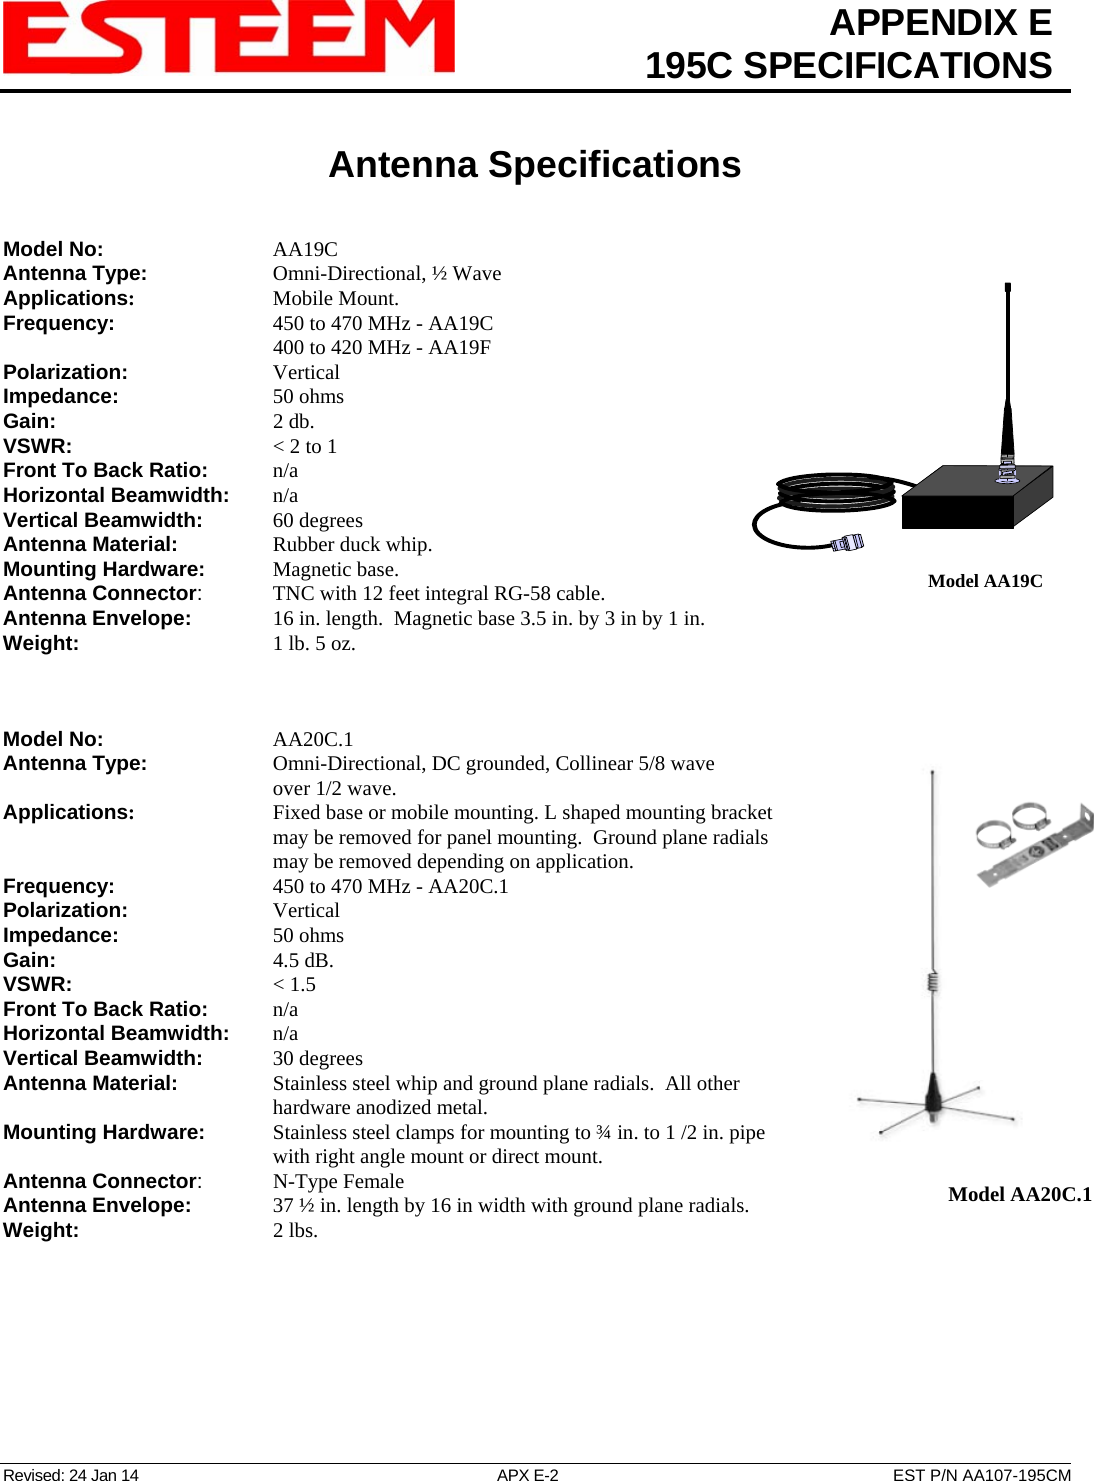  APPENDIX E  195C SPECIFICATIONS   Antenna Specifications   Revised: 24 Jan 14  APX E-2  EST P/N AA107-195CM Model No:    AA19C Antenna Type:   Omni-Directional, ½ Wave  Model AA19CApplications:    Mobile Mount. Frequency:    450 to 470 MHz - AA19C       400 to 420 MHz - AA19F  Polarization:    Vertical Impedance:    50 ohms Gain:     2 db. VSWR:      &lt; 2 to 1  Front To Back Ratio:   n/a Horizontal Beamwidth:  n/a Vertical Beamwidth:      60 degrees Antenna Material:     Rubber duck whip.  Mounting Hardware:      Magnetic base.  Antenna Connector:    TNC with 12 feet integral RG-58 cable. Antenna Envelope:   16 in. length.  Magnetic base 3.5 in. by 3 in by 1 in. Weight:           1 lb. 5 oz.     Model No:    AA20C.1 Antenna Type:   Omni-Directional, DC grounded, Collinear 5/8 wave over 1/2 wave.    Model AA20C.1   Applications:       Fixed base or mobile mounting. L shaped mounting bracket may be removed for panel mounting.  Ground plane radials may be removed depending on application. Frequency:    450 to 470 MHz - AA20C.1 Polarization:    Vertical Impedance:    50 ohms Gain:     4.5 dB. VSWR:      &lt; 1.5  Front To Back Ratio:   n/a Horizontal Beamwidth:  n/a Vertical Beamwidth:      30 degrees Antenna Material:     Stainless steel whip and ground plane radials.  All other hardware anodized metal.  Mounting Hardware:      Stainless steel clamps for mounting to ¾ in. to 1 /2 in. pipe with right angle mount or direct mount.  Antenna Connector:   N-Type Female Antenna Envelope:   37 ½ in. length by 16 in width with ground plane radials. Weight:       2 lbs. 